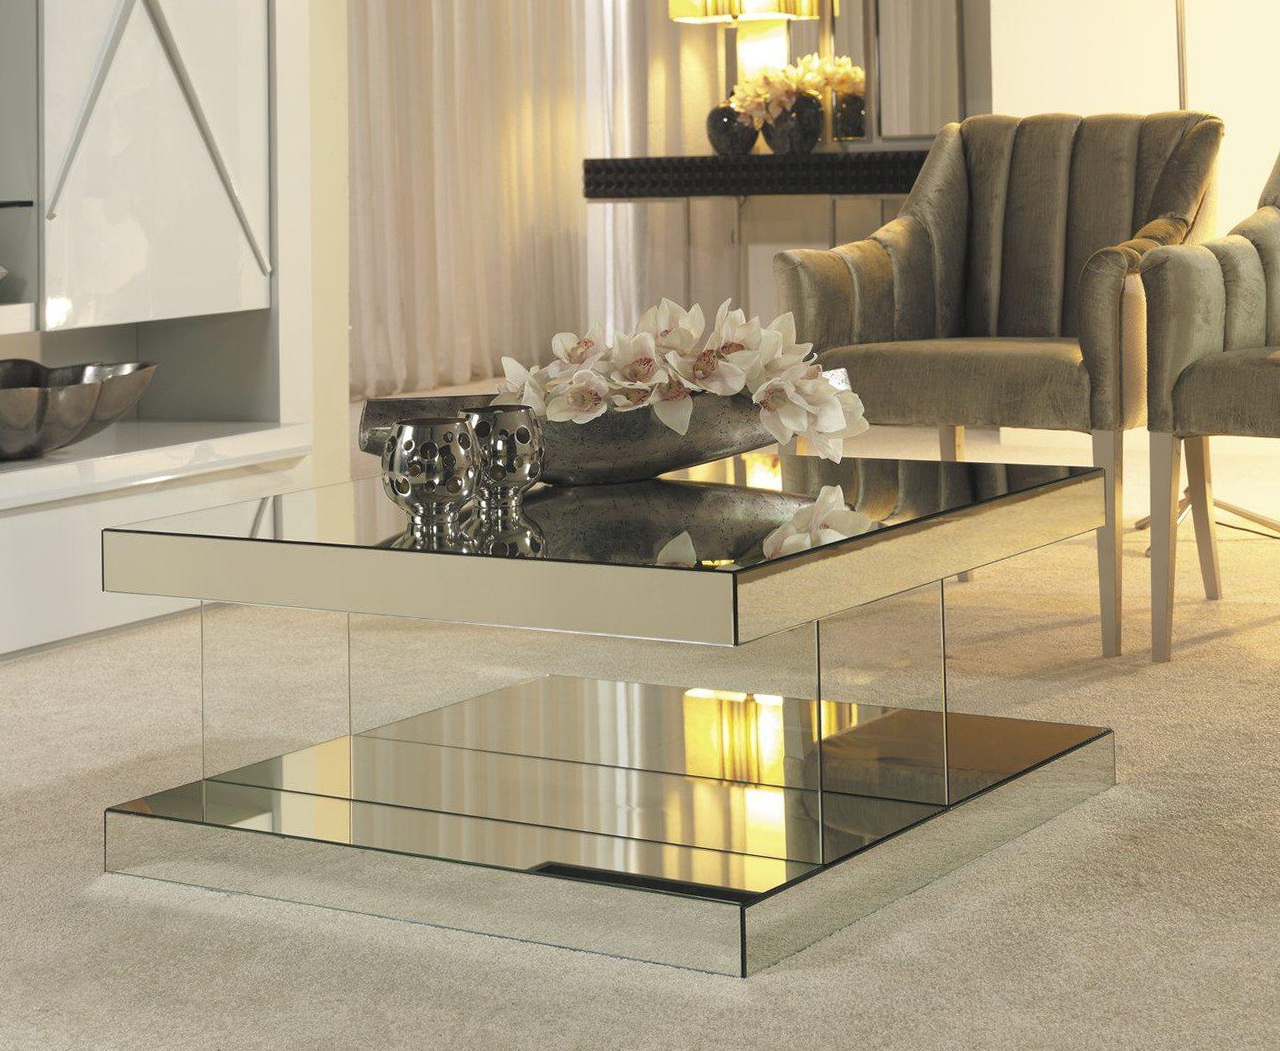 Cheap Mirrored Coffee Table Furniture | Roy Home Design